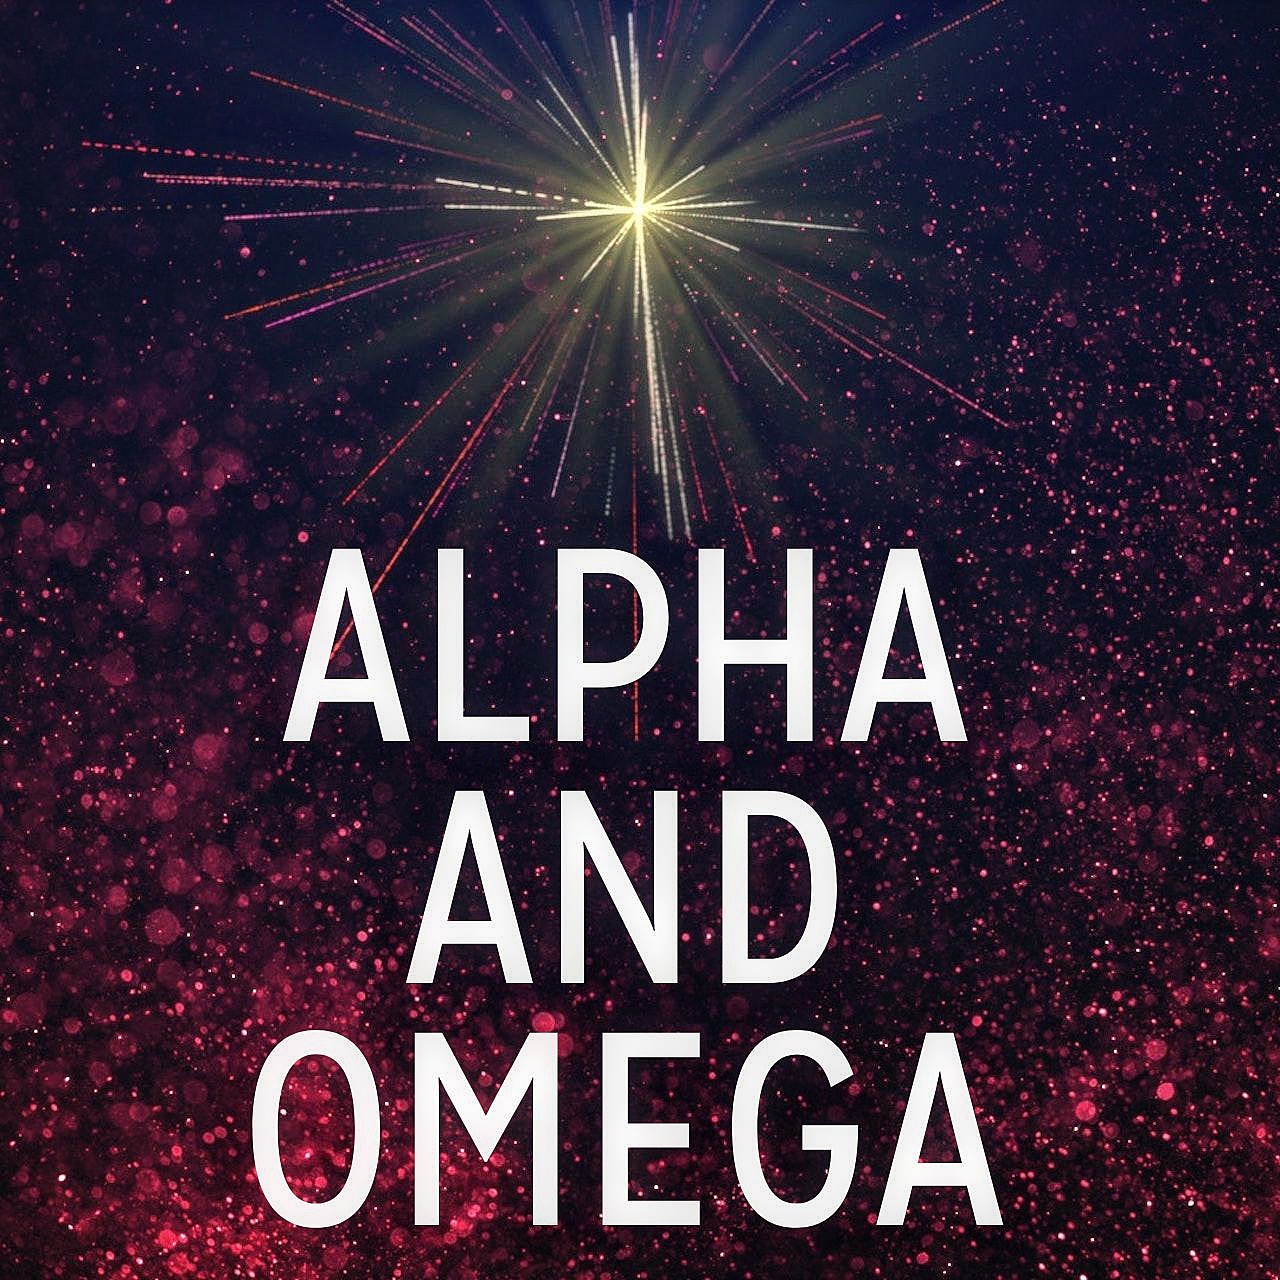 And His Name Shall Be Called: Alpha and Omega